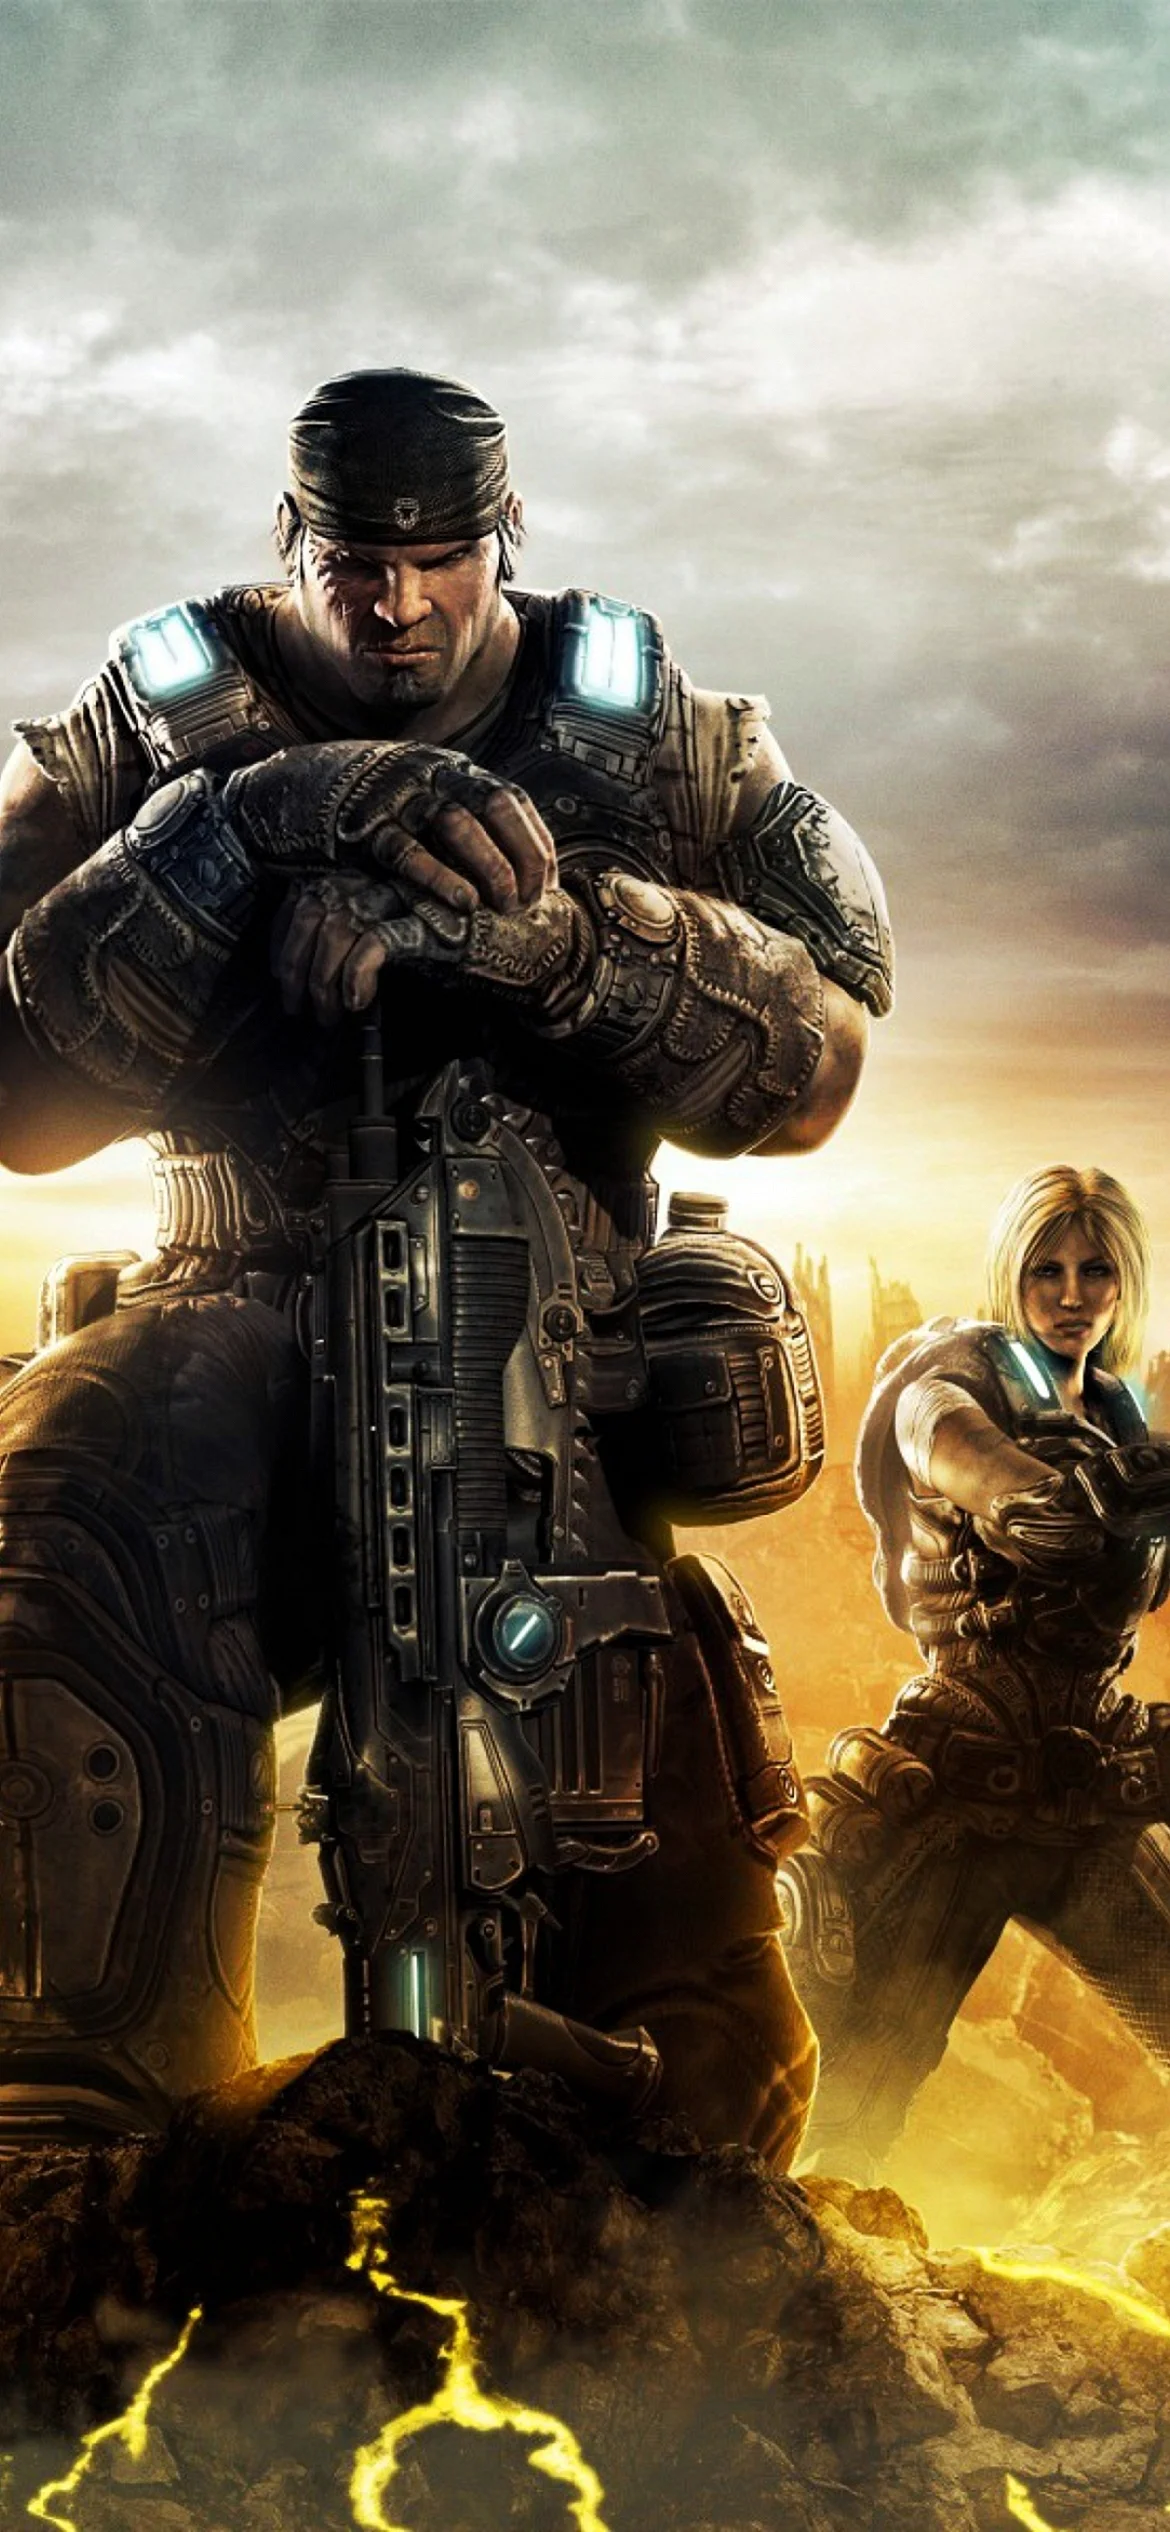 Gears Of War Wallpaper for iPhone 12 Pro